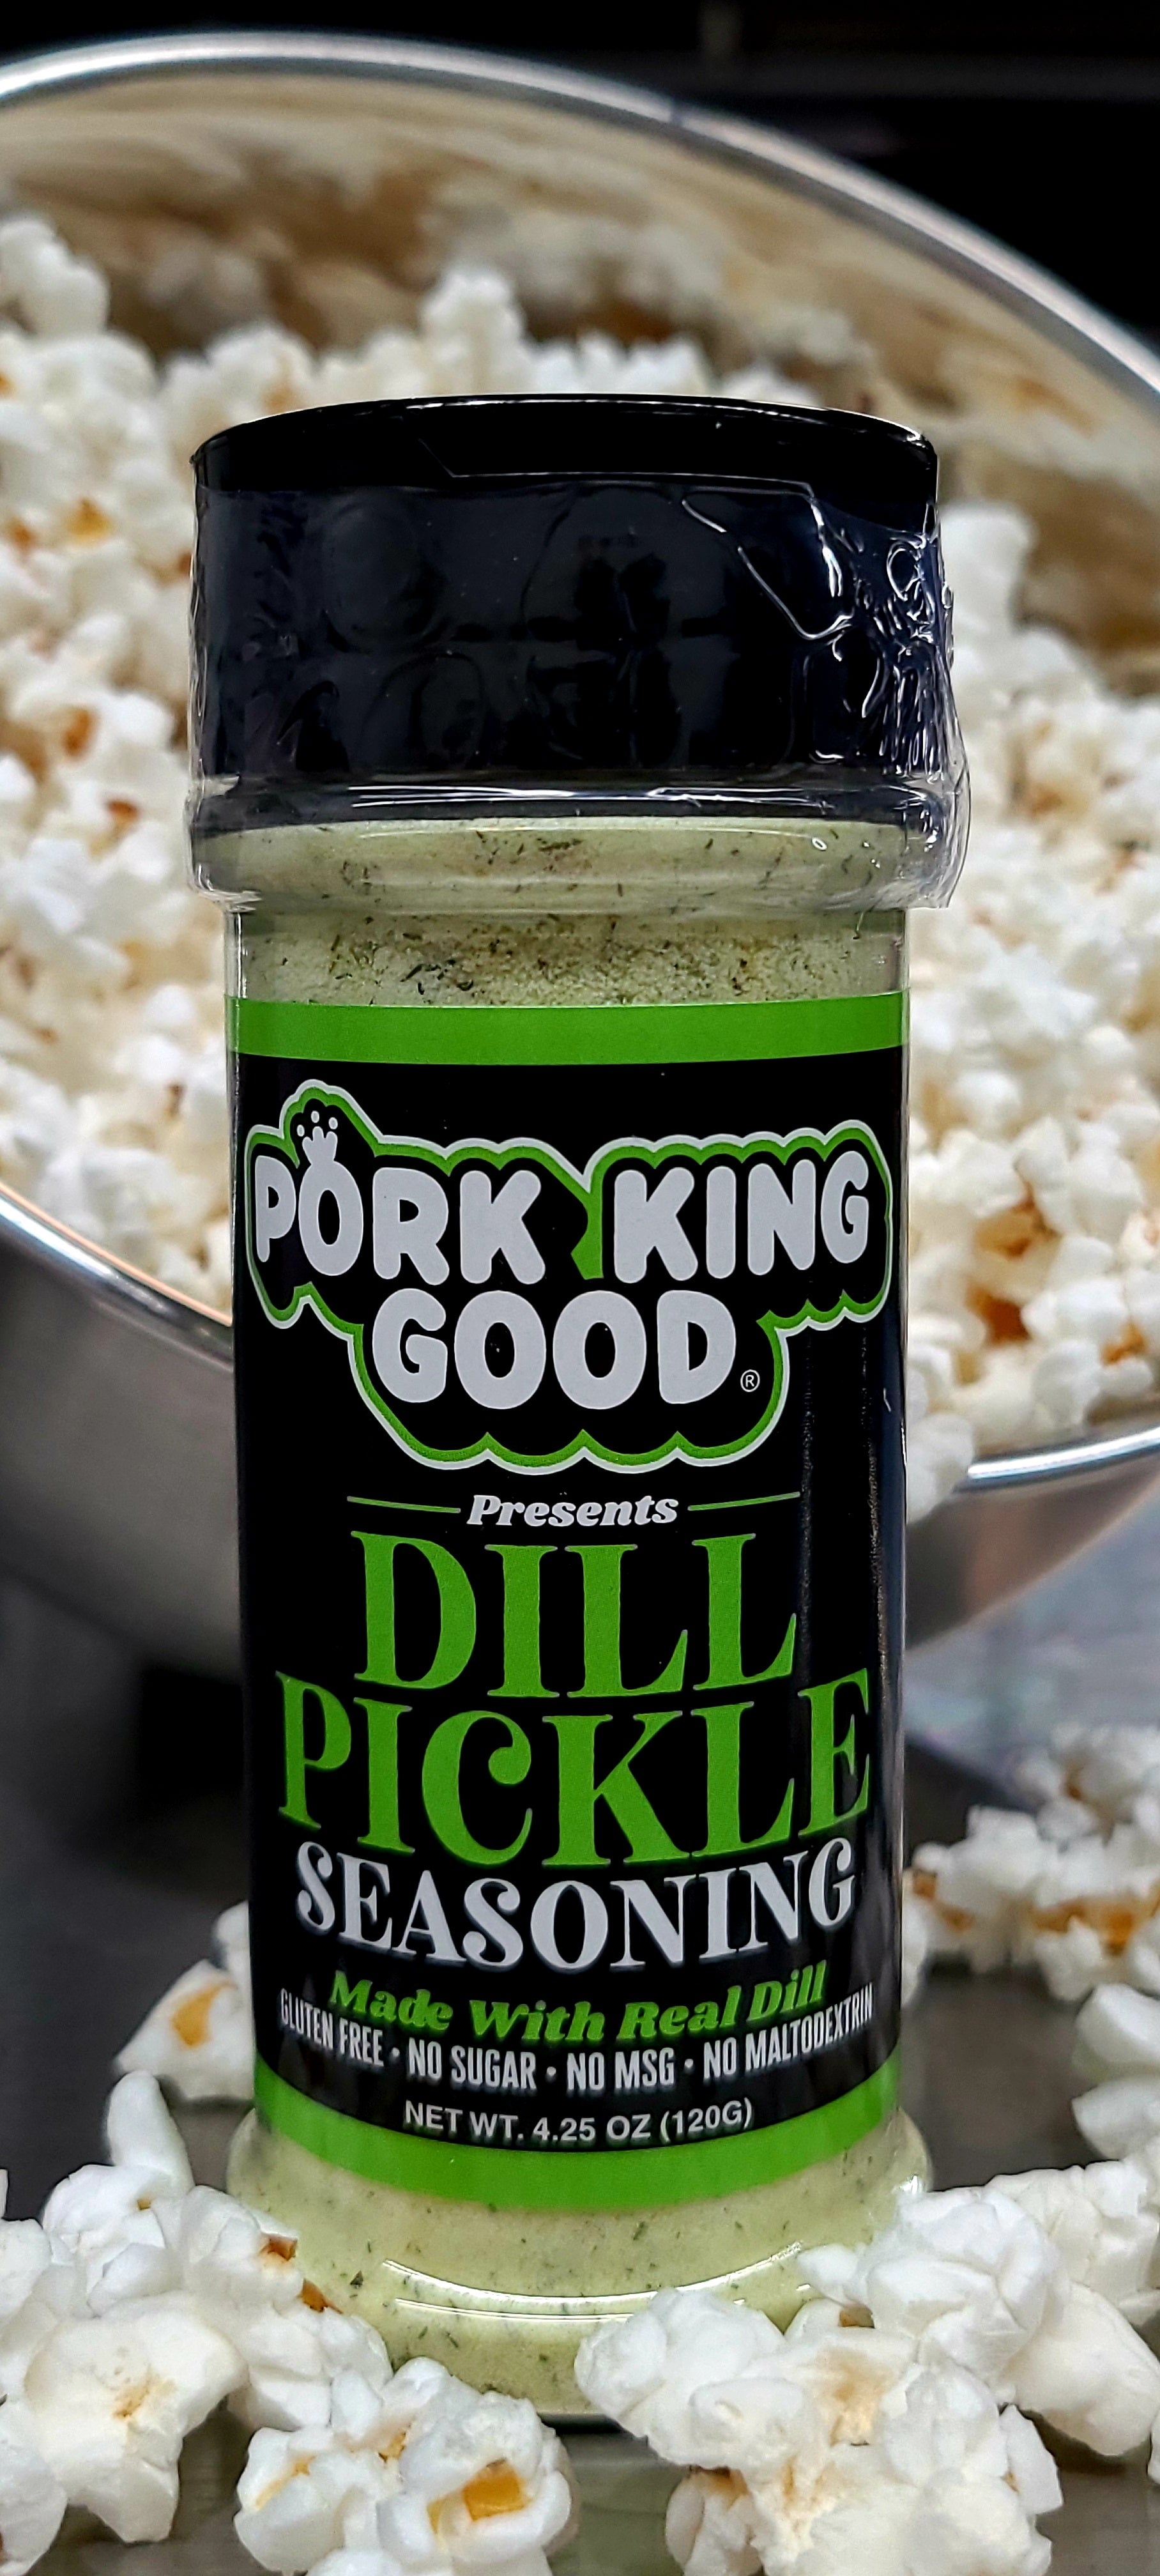  Trader Joe's Seasoning in a Pickle, Dill Pickle